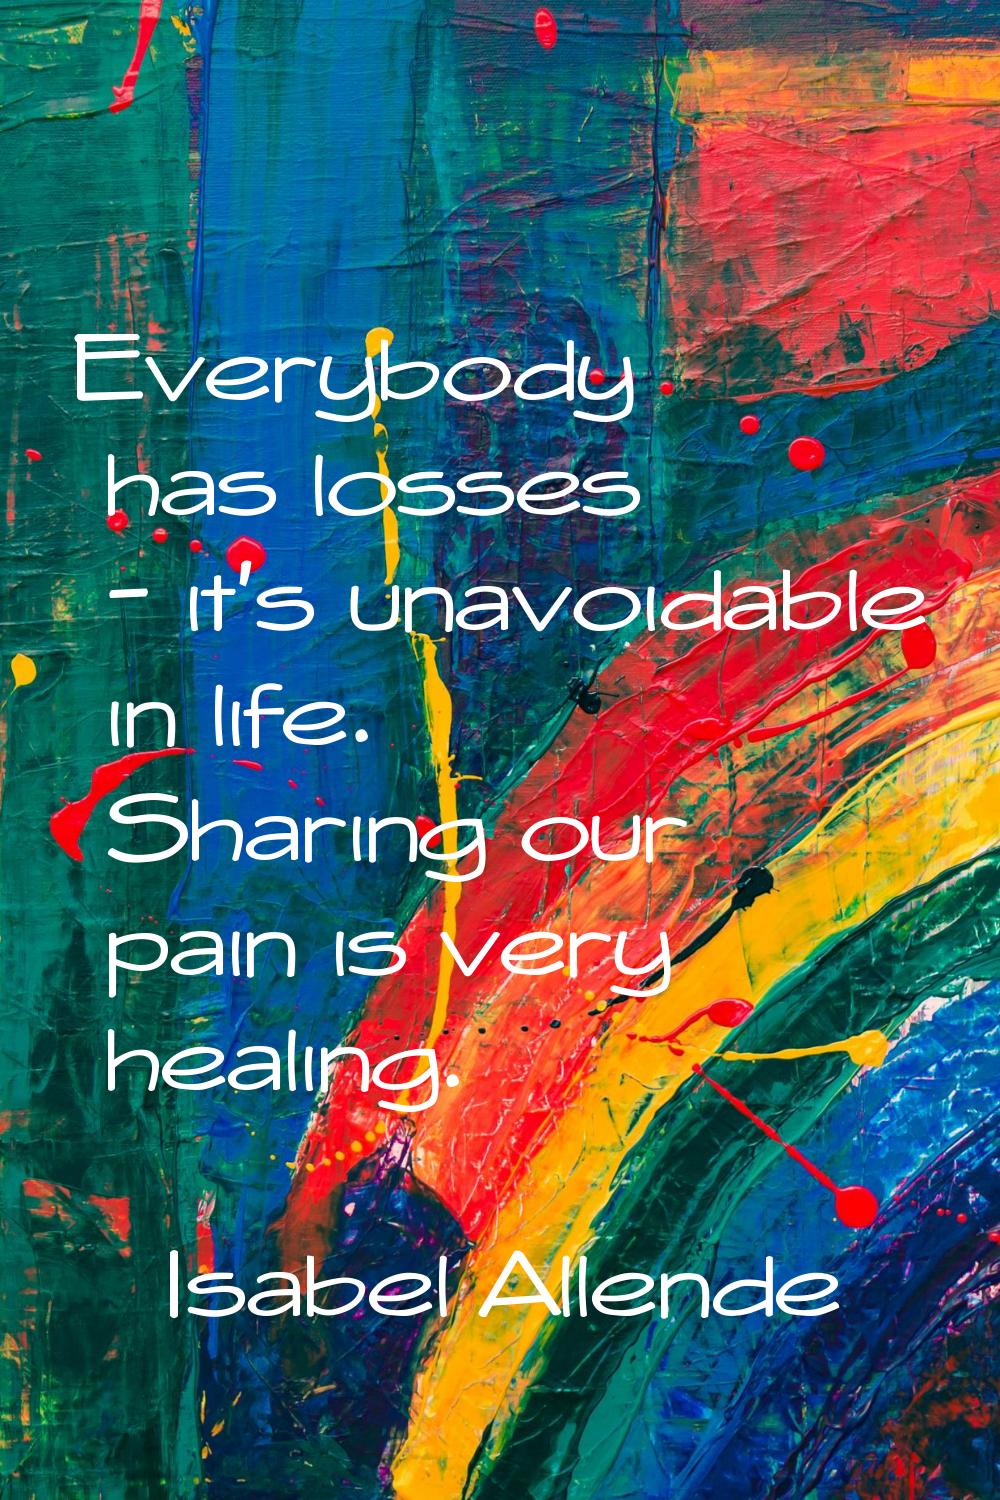 Everybody has losses - it's unavoidable in life. Sharing our pain is very healing.